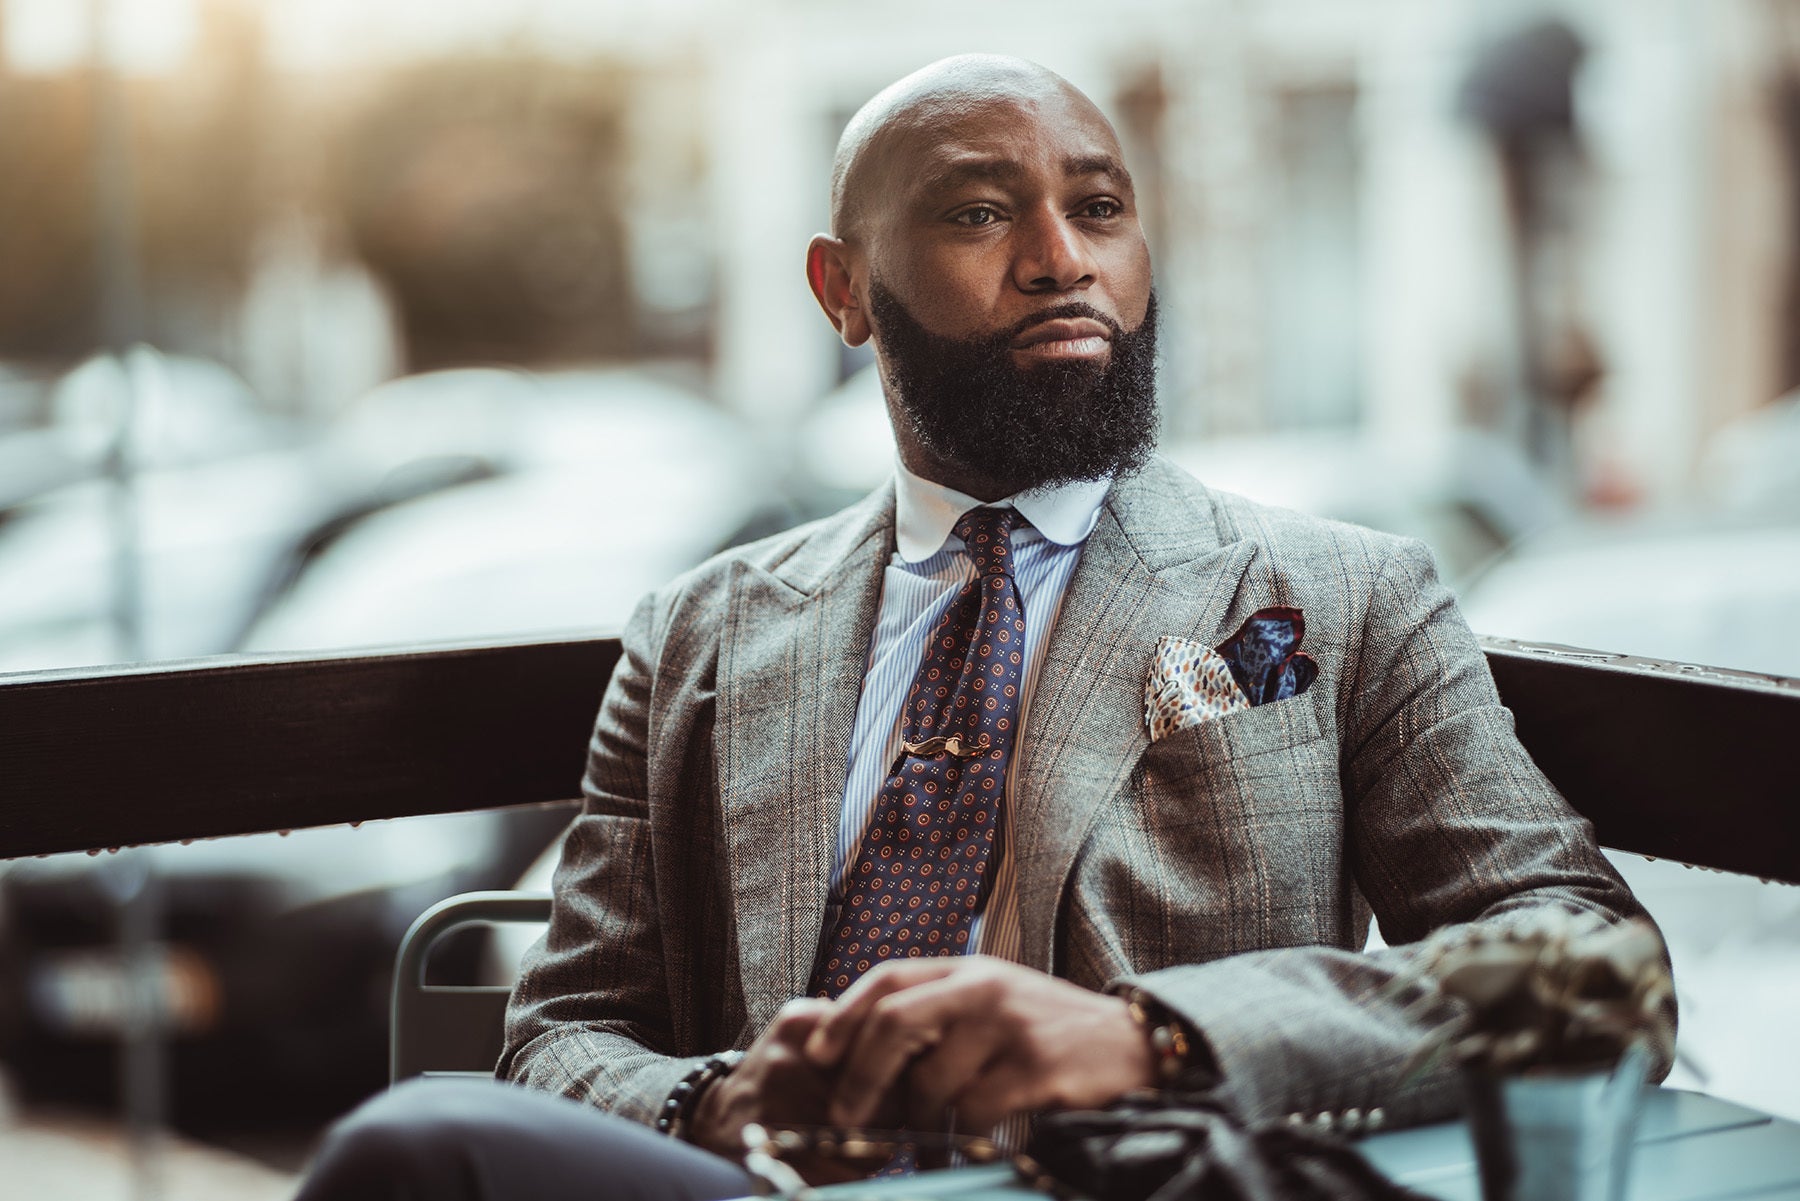 Top 5 Beard Styles for Black Men to Wear with a Suit